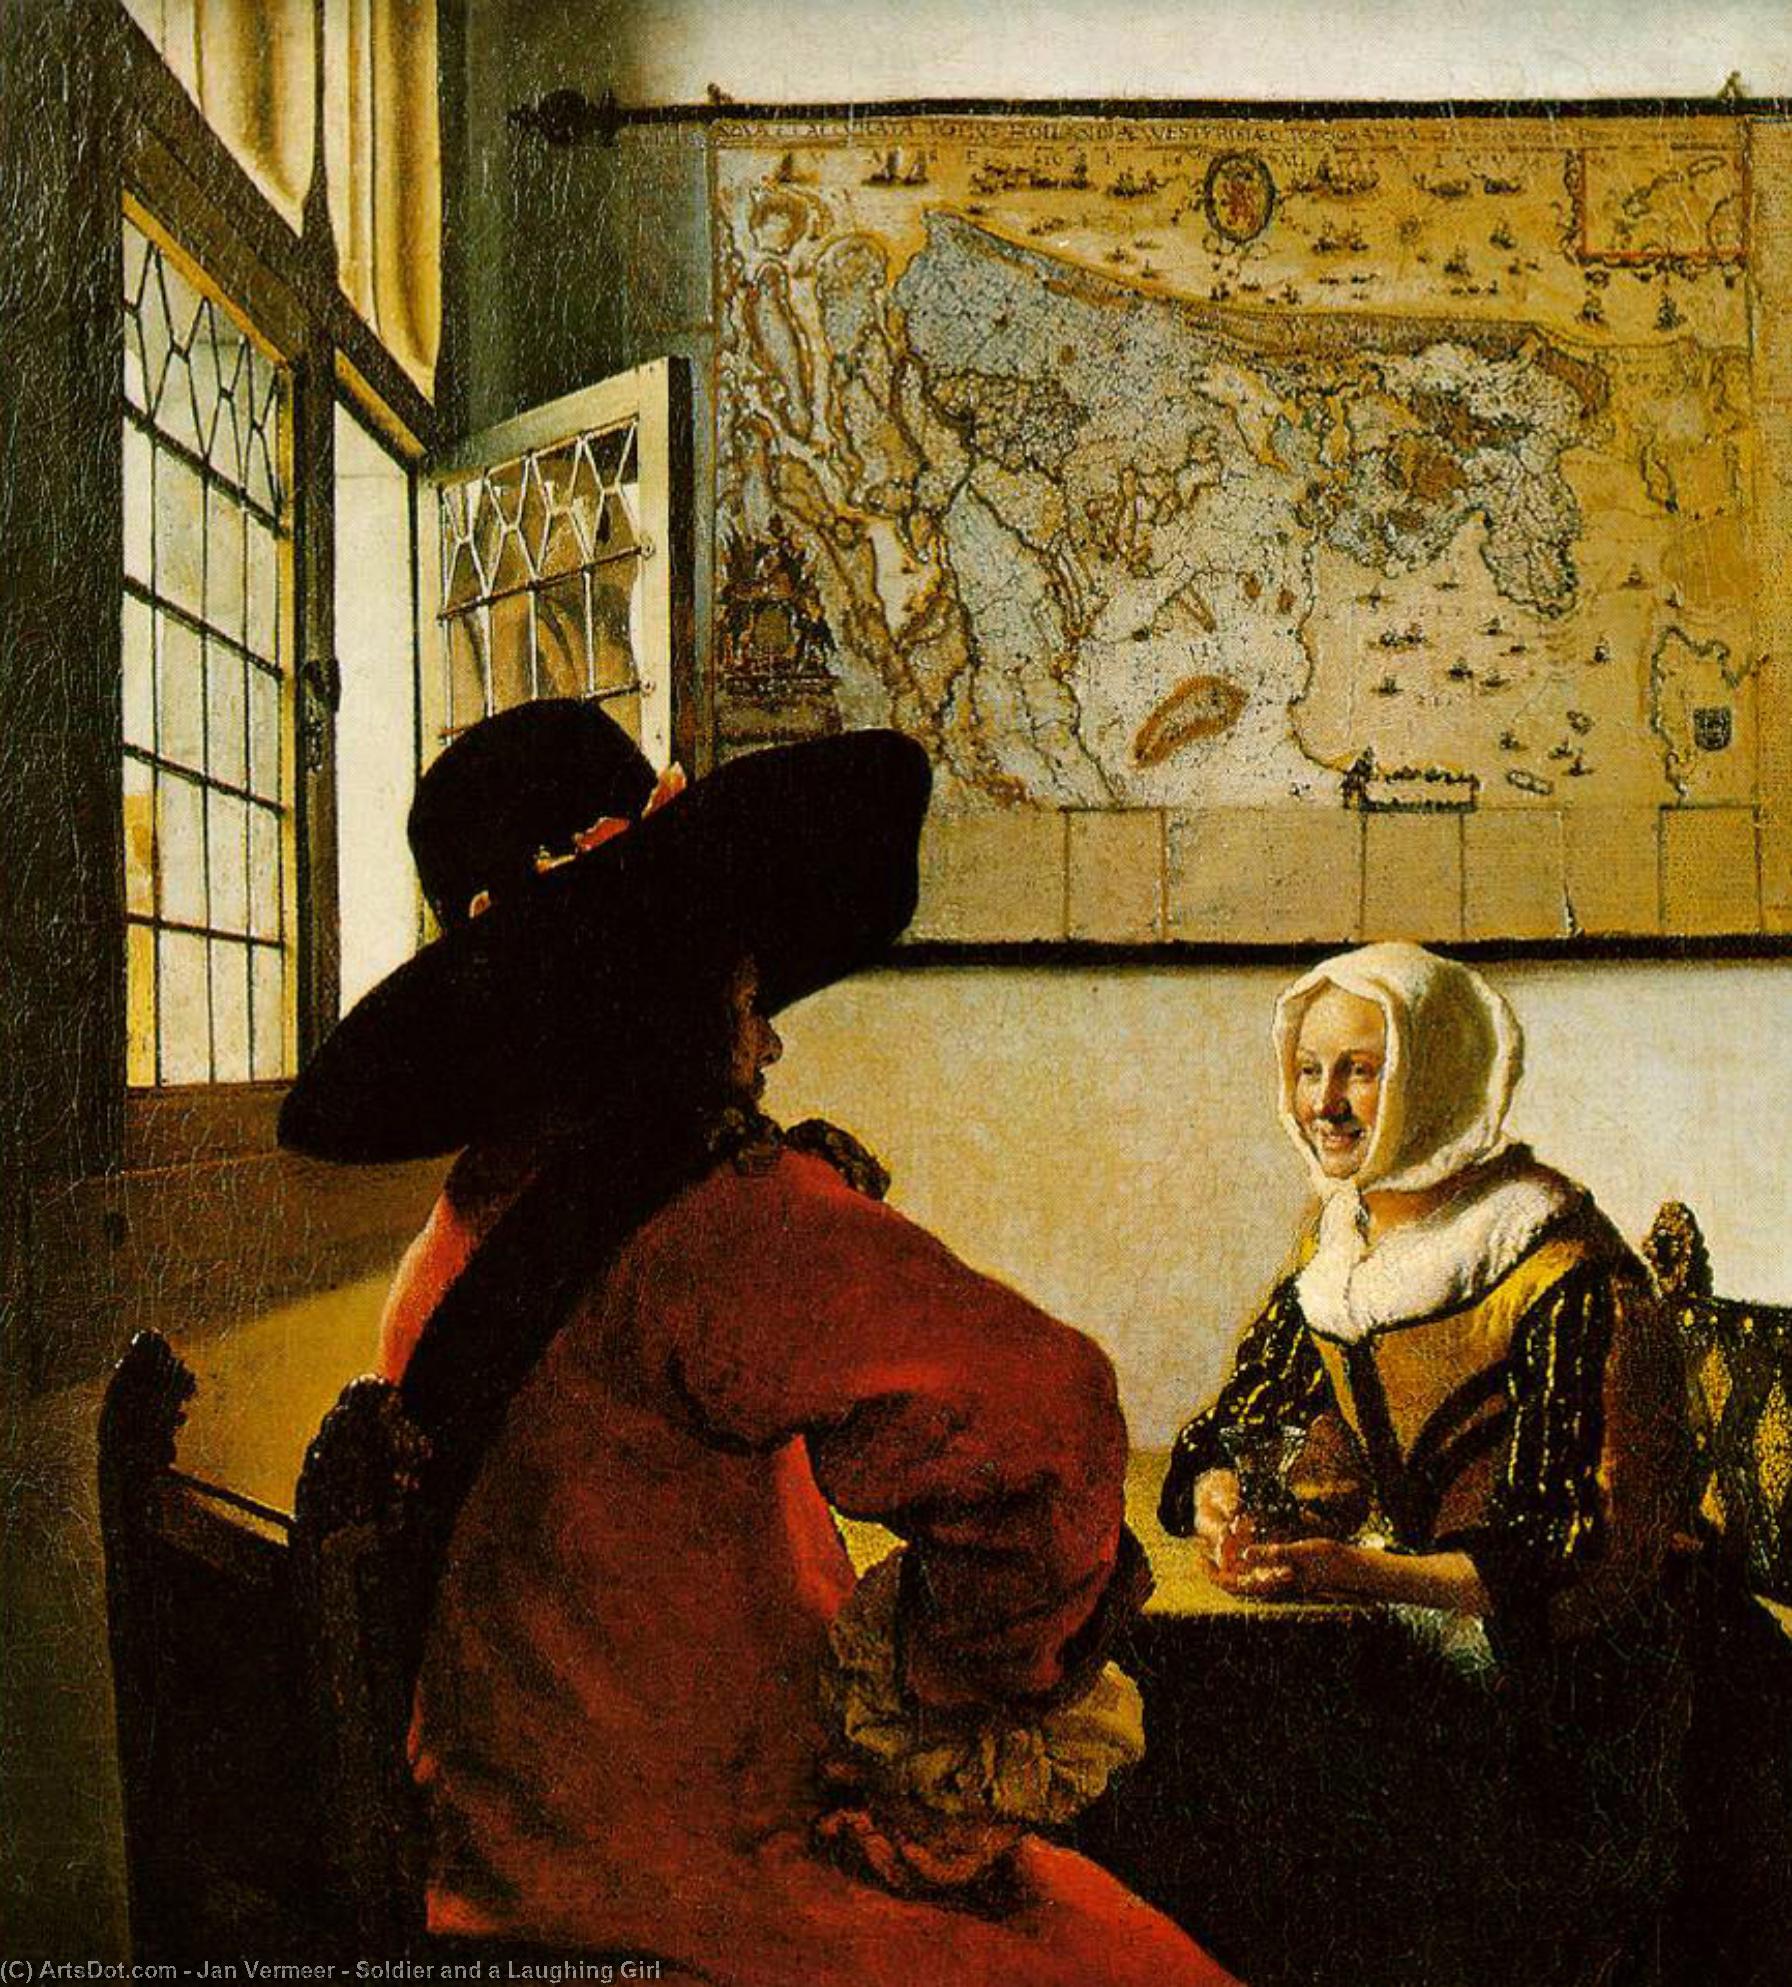 WikiOO.org - Encyclopedia of Fine Arts - Festés, Grafika Jan Vermeer - Soldier and a Laughing Girl